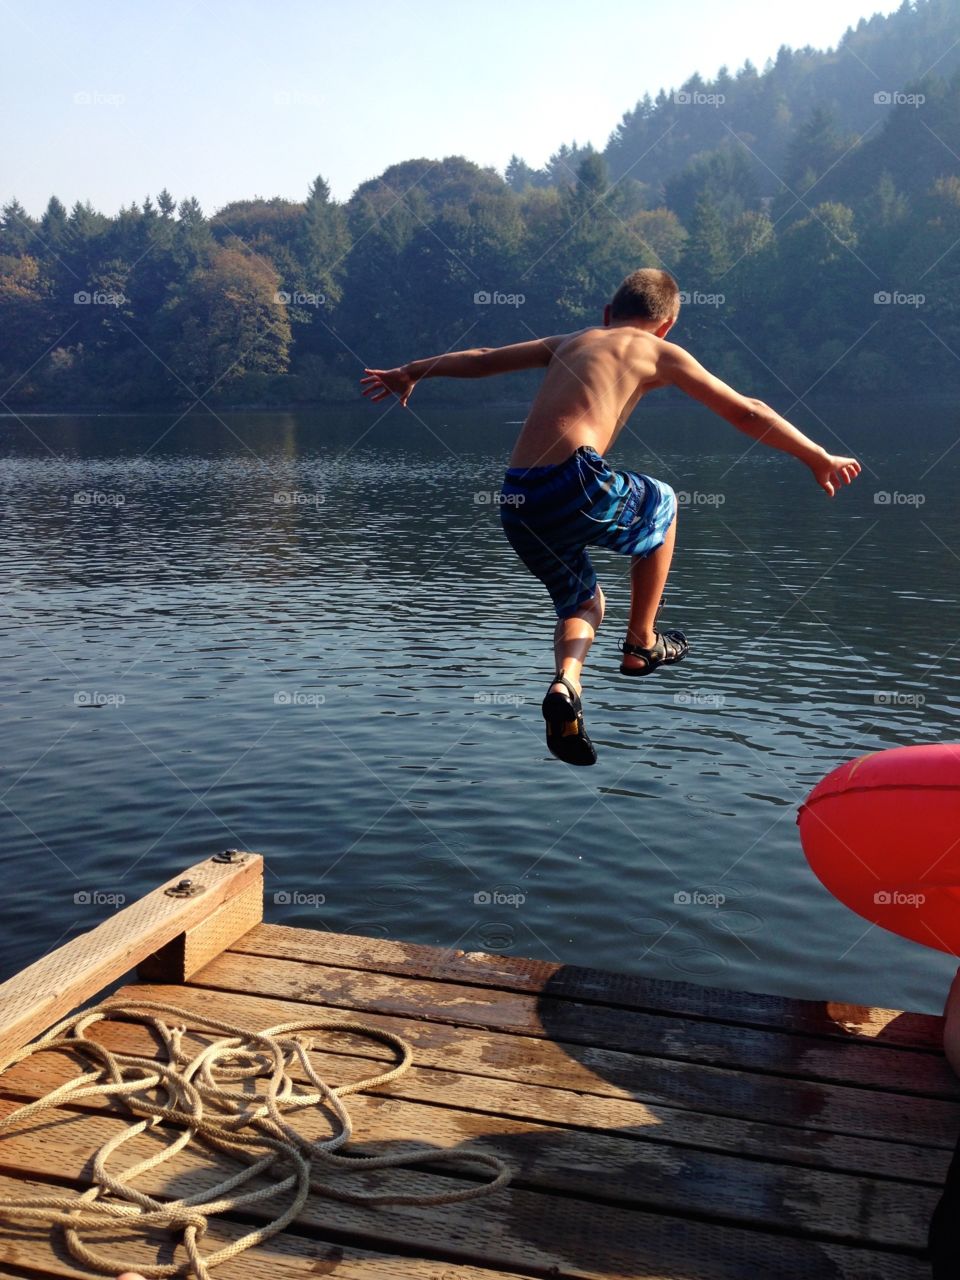 Jump In A Lake. Boy jumping off Dock into a lake